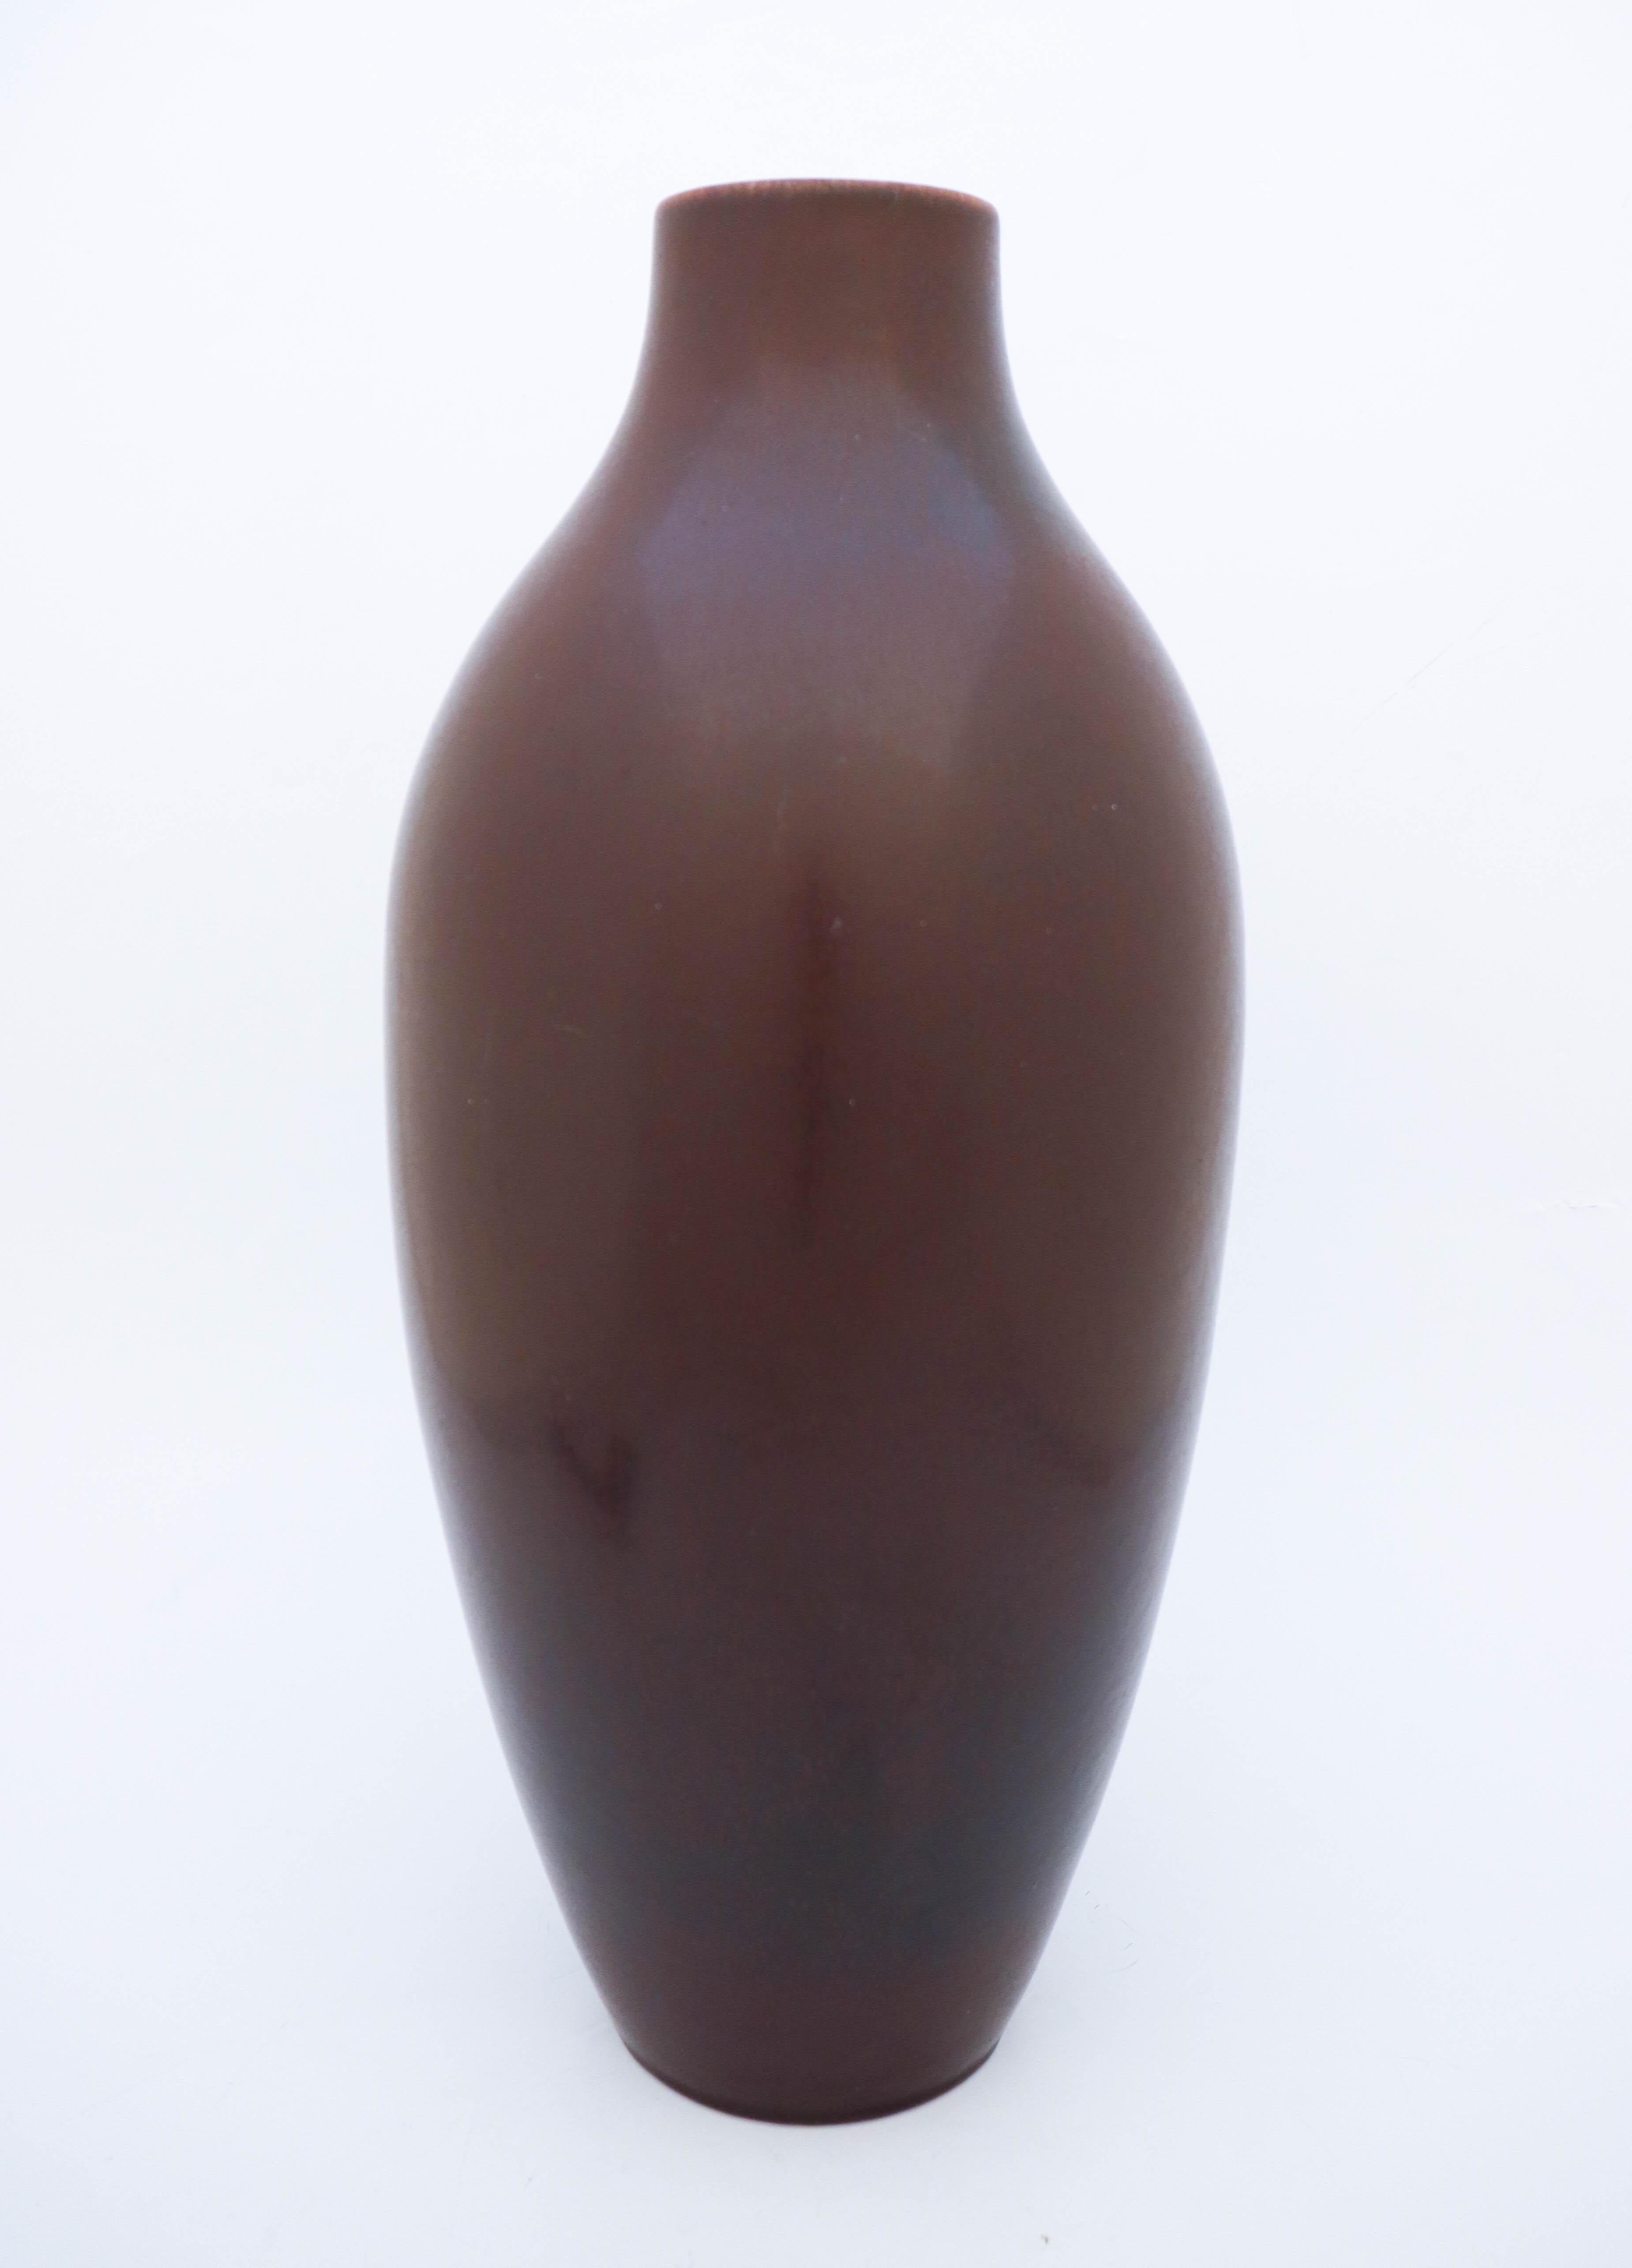 Large vase by Carl-Harry Stålhane with a beautiful brown glaze. It is made in the 1950s.